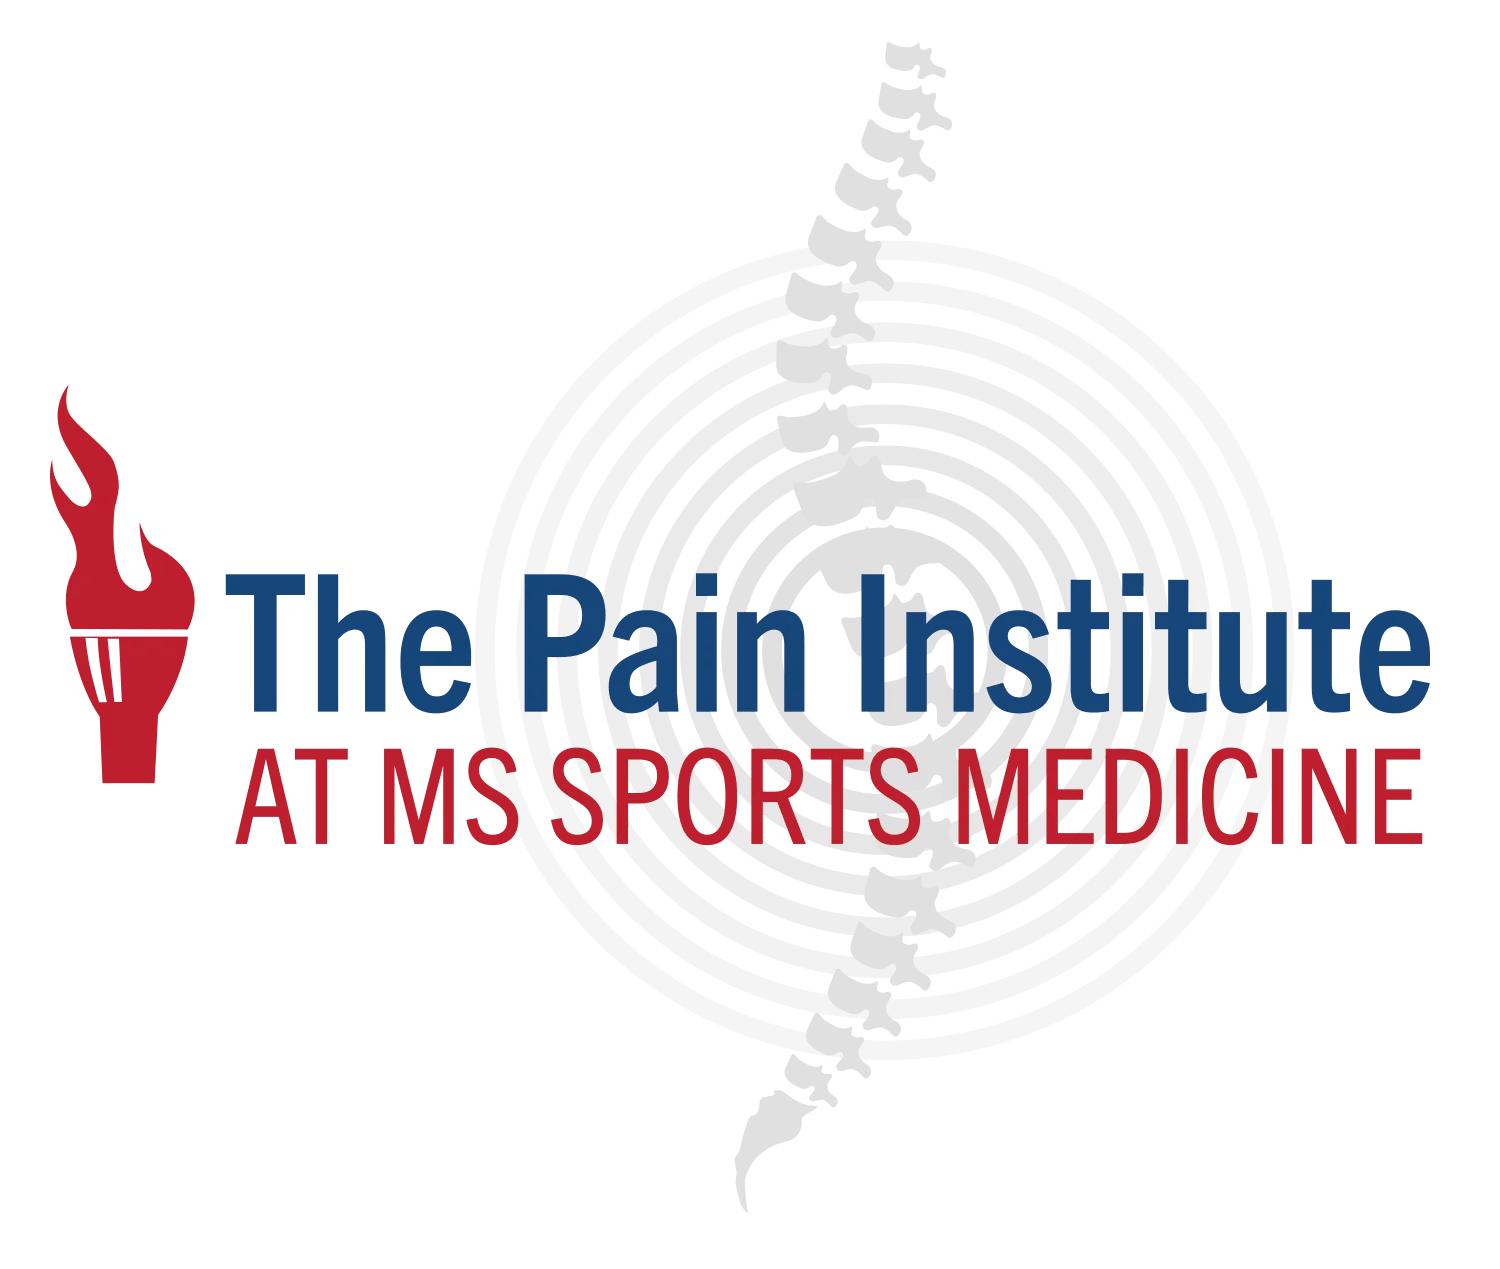 The Pain Institute at MS Sports Medicine logo